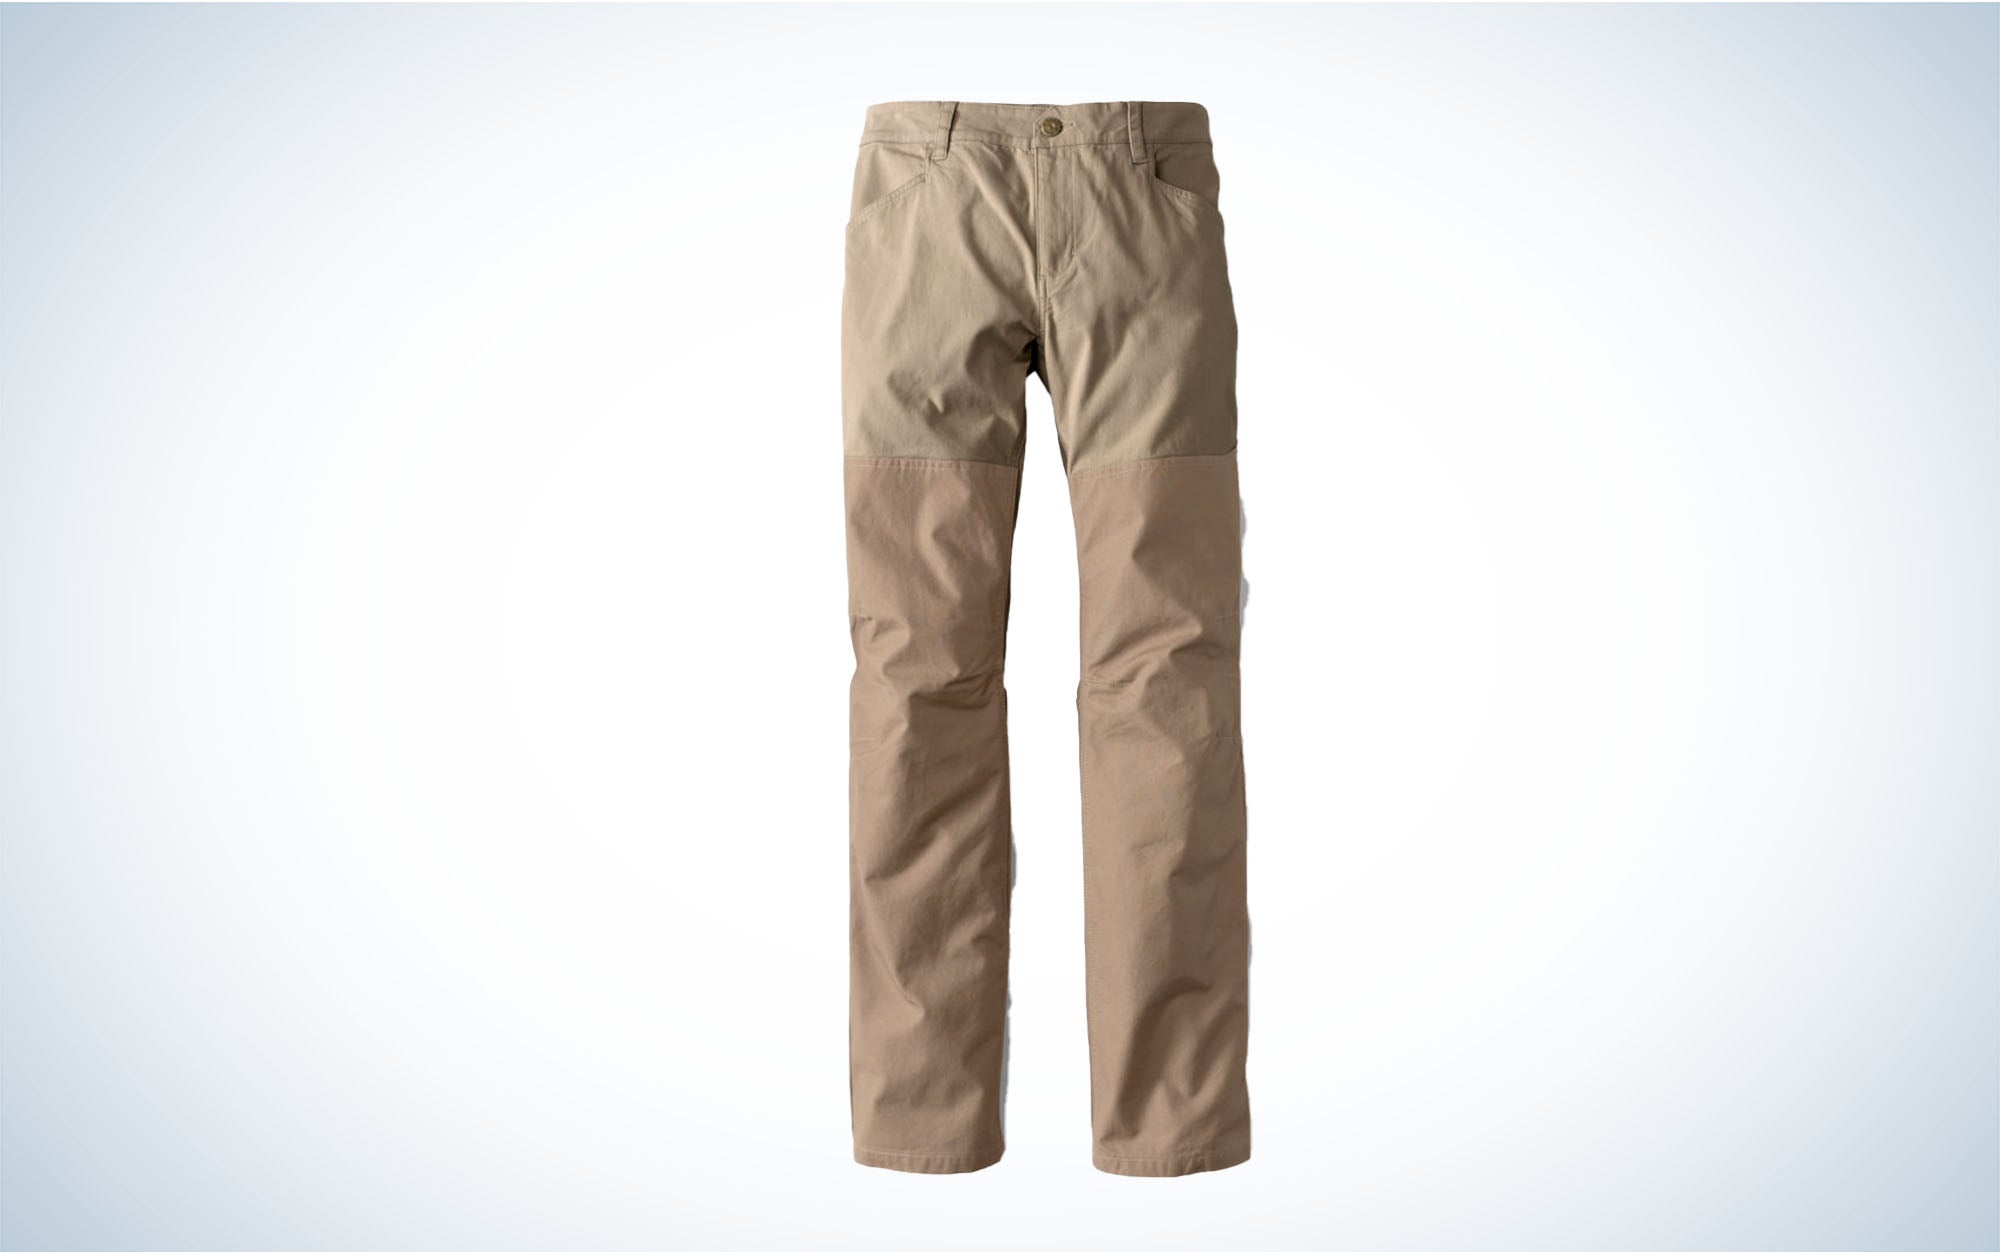 We tested the Missouri Breaks Field Pants and found them perfect for upland hunts.